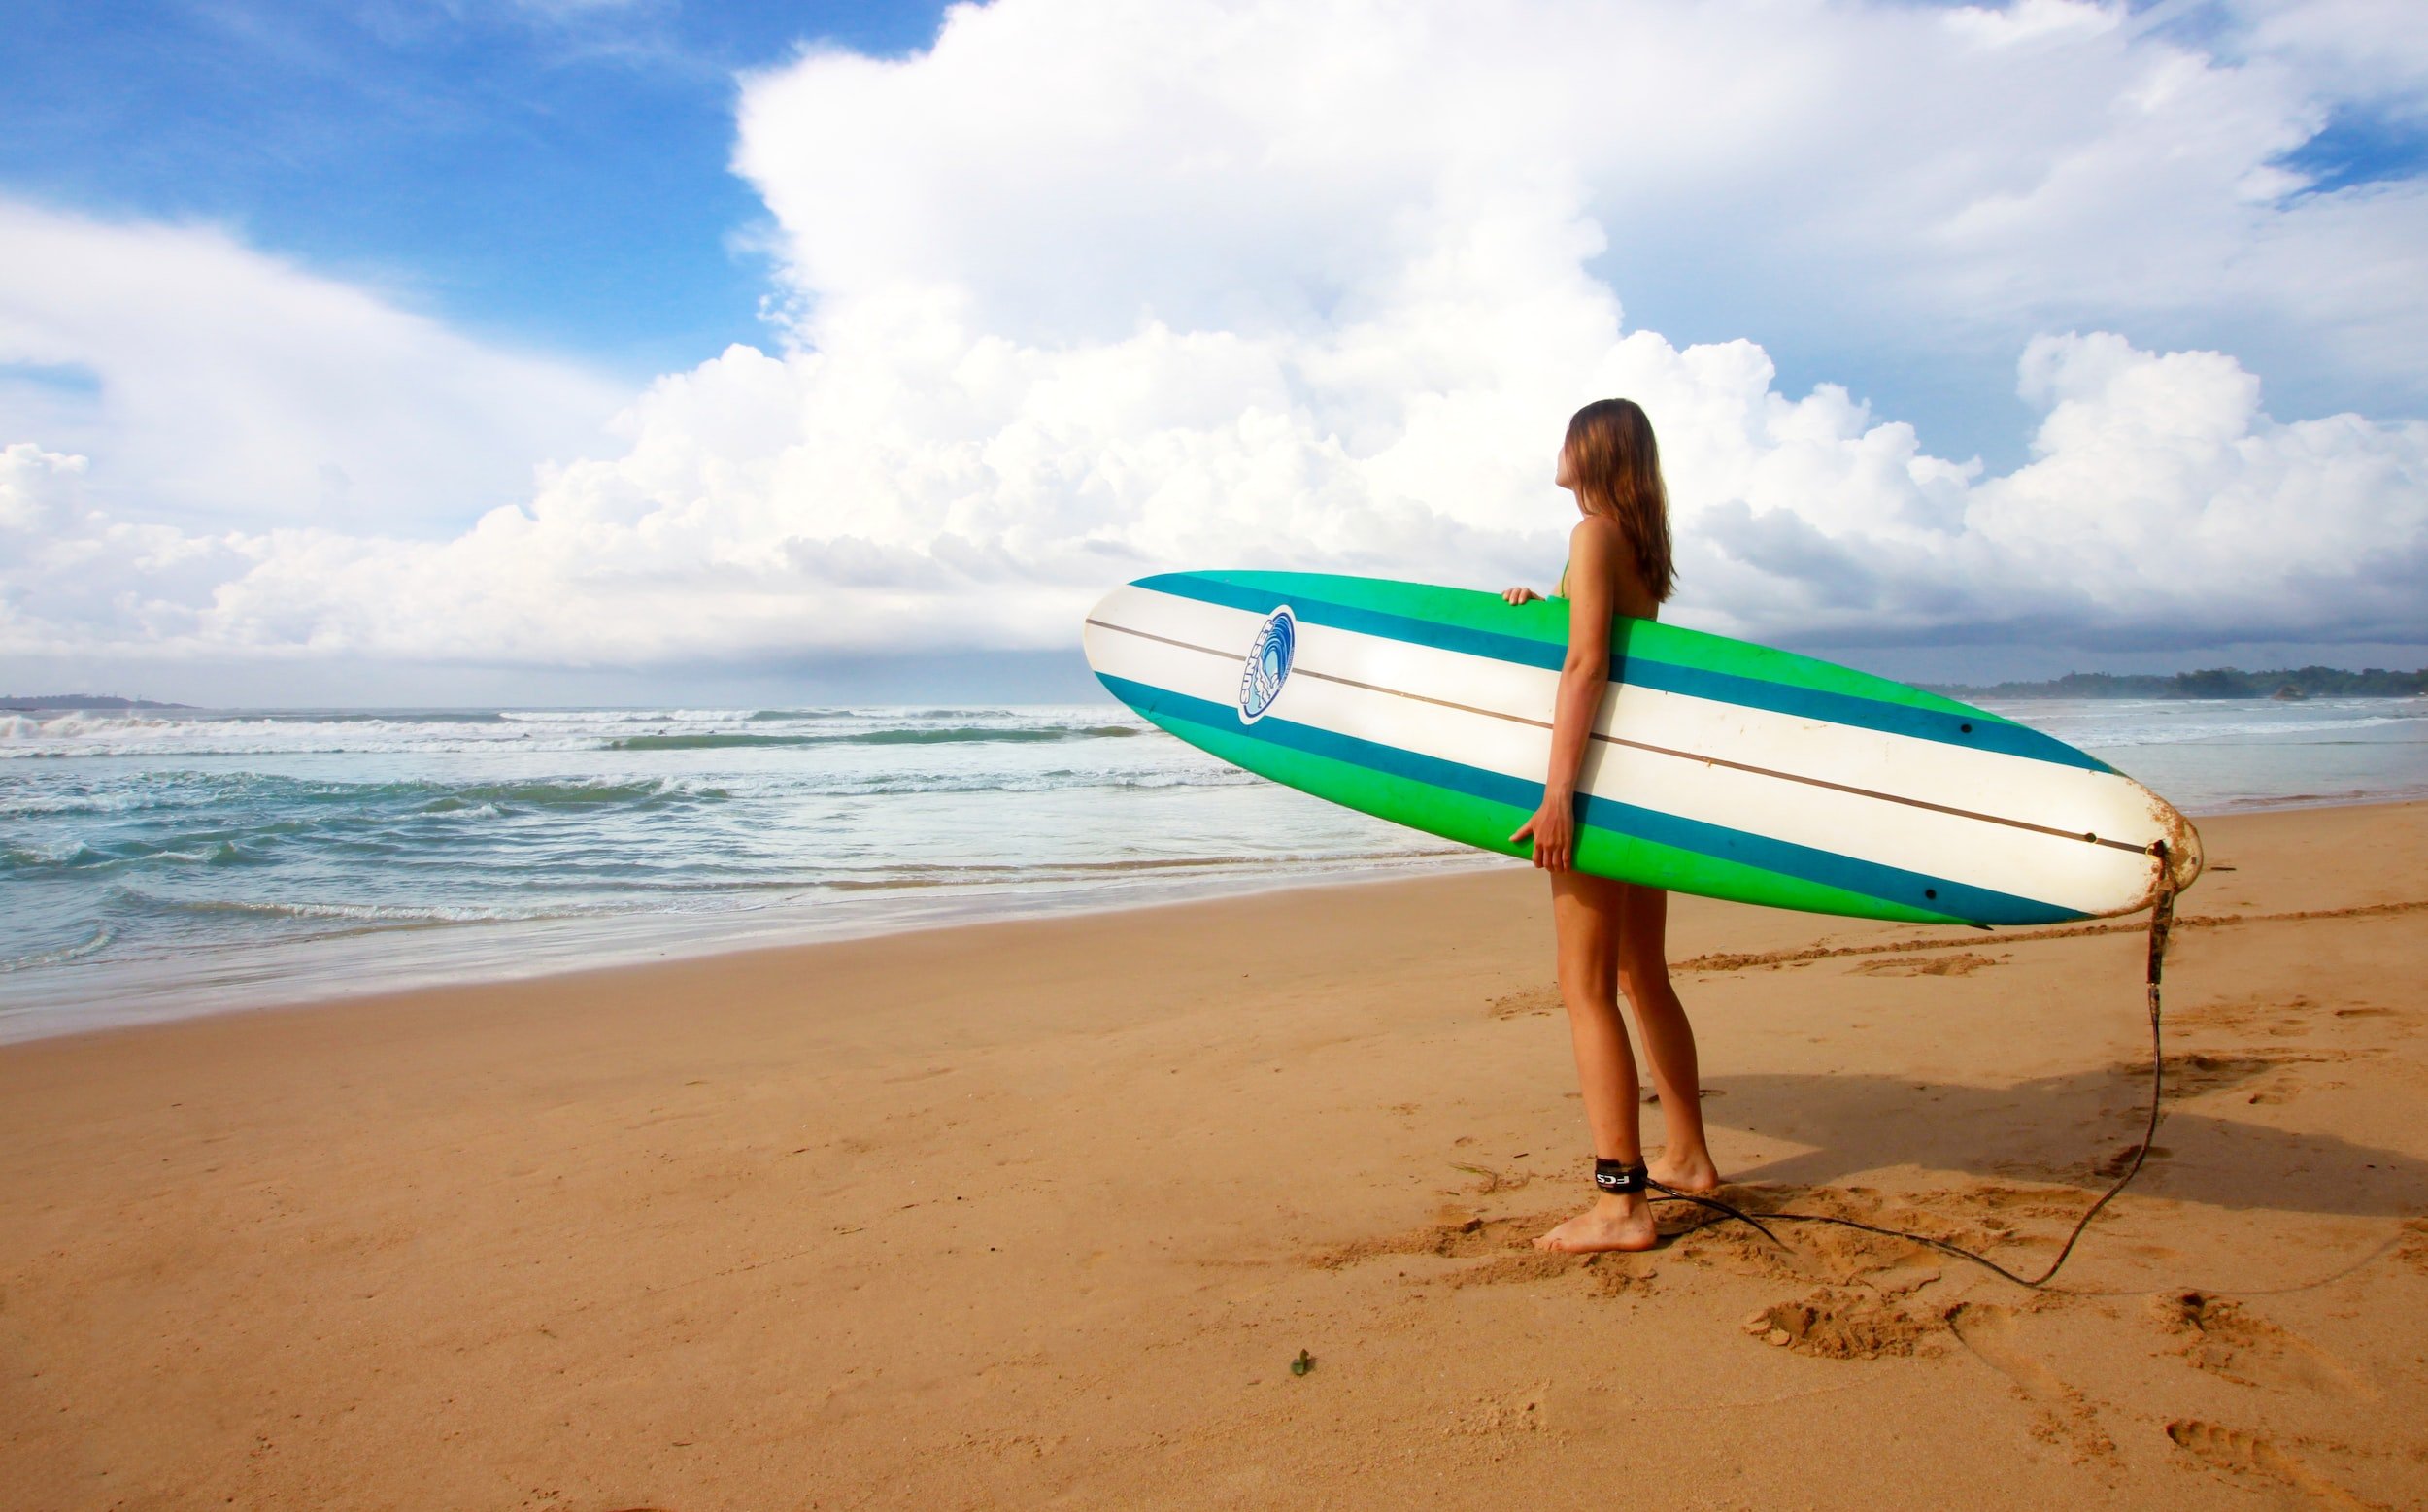 Discover the 10+ Best Bali Beaches to Learn to Surf With Map